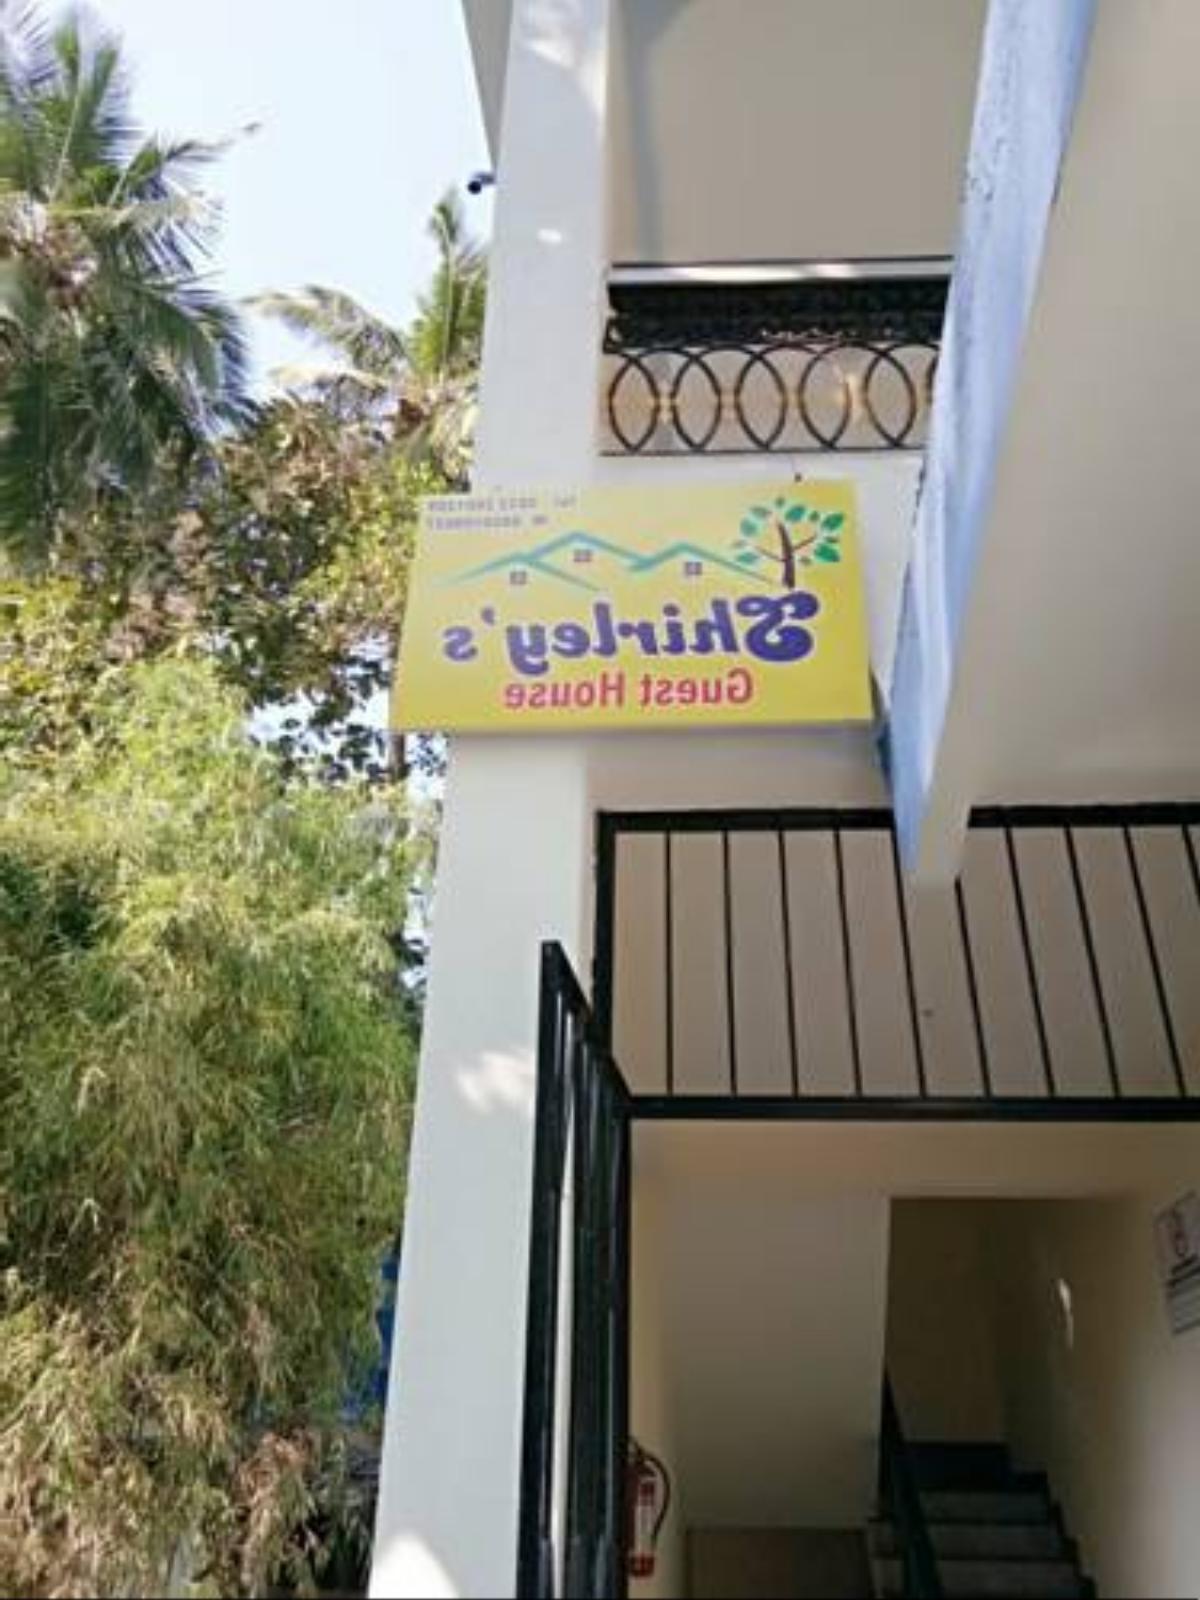 shirley's guest house Hotel Majorda India